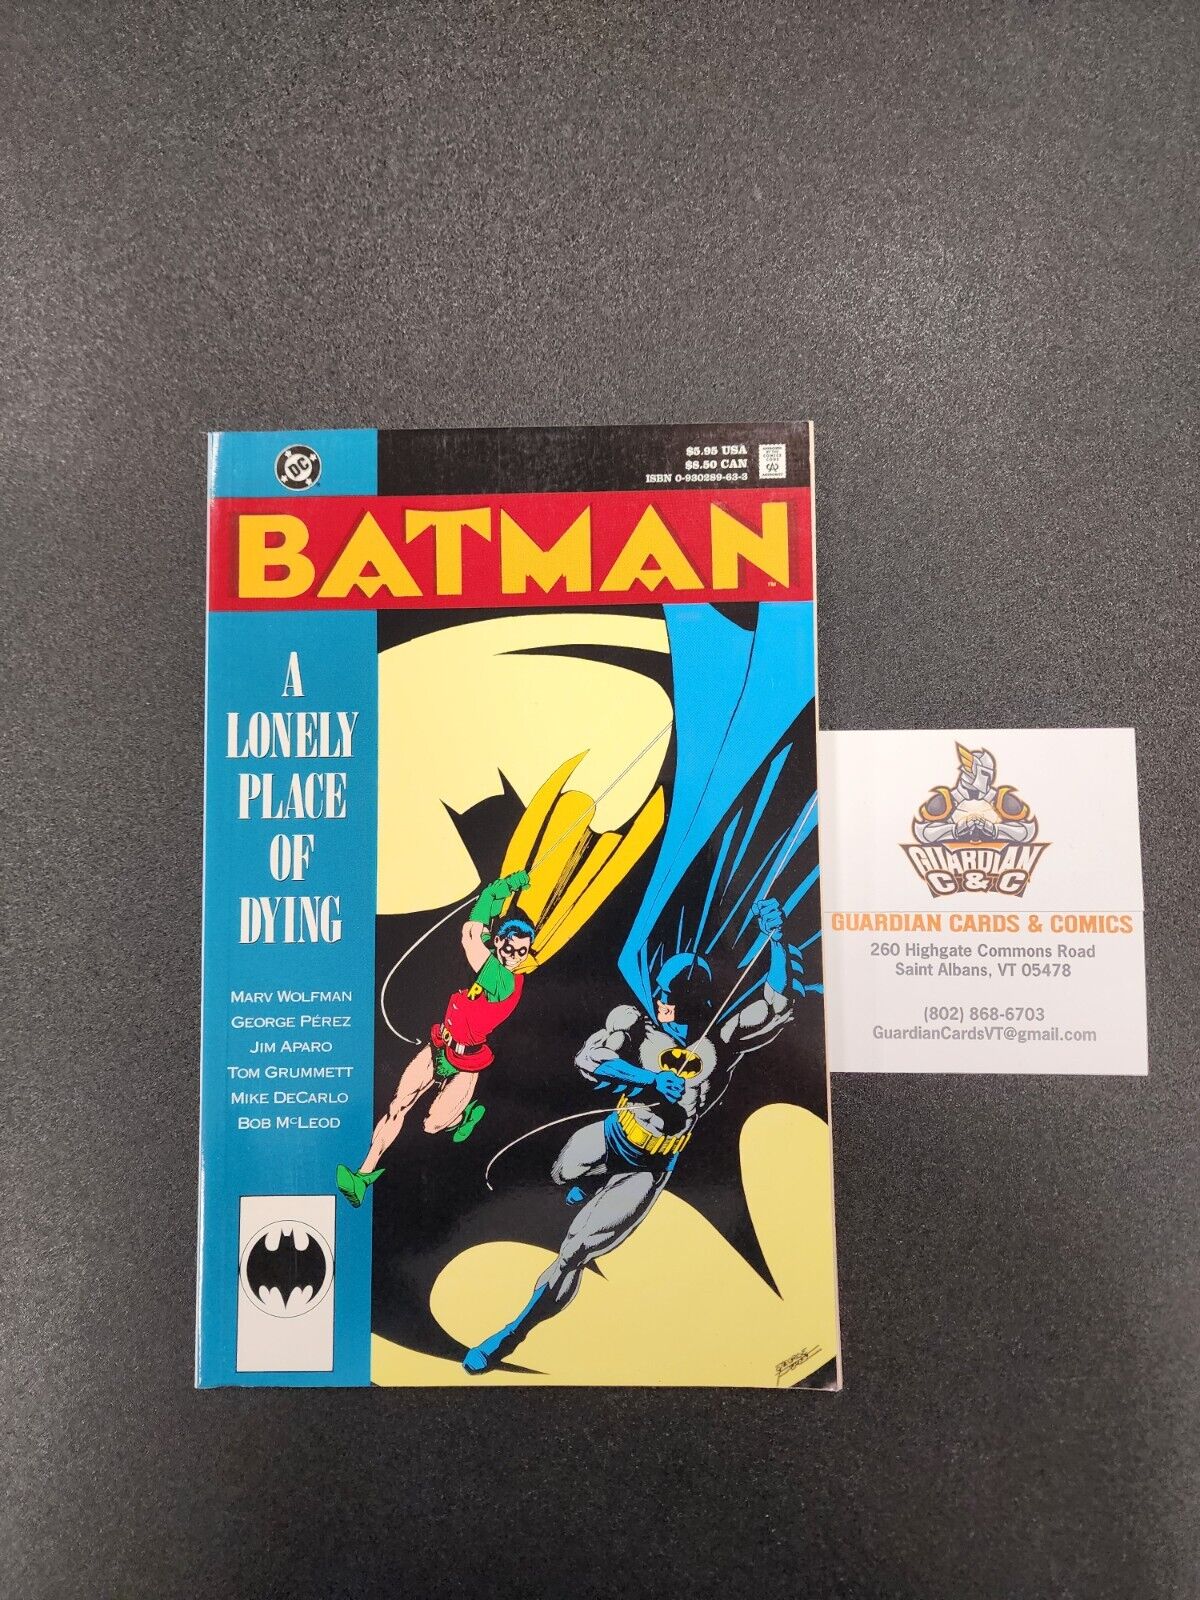 Batman: A Lonely Place of Dying (DC Comics, 1990) Trade Paperback